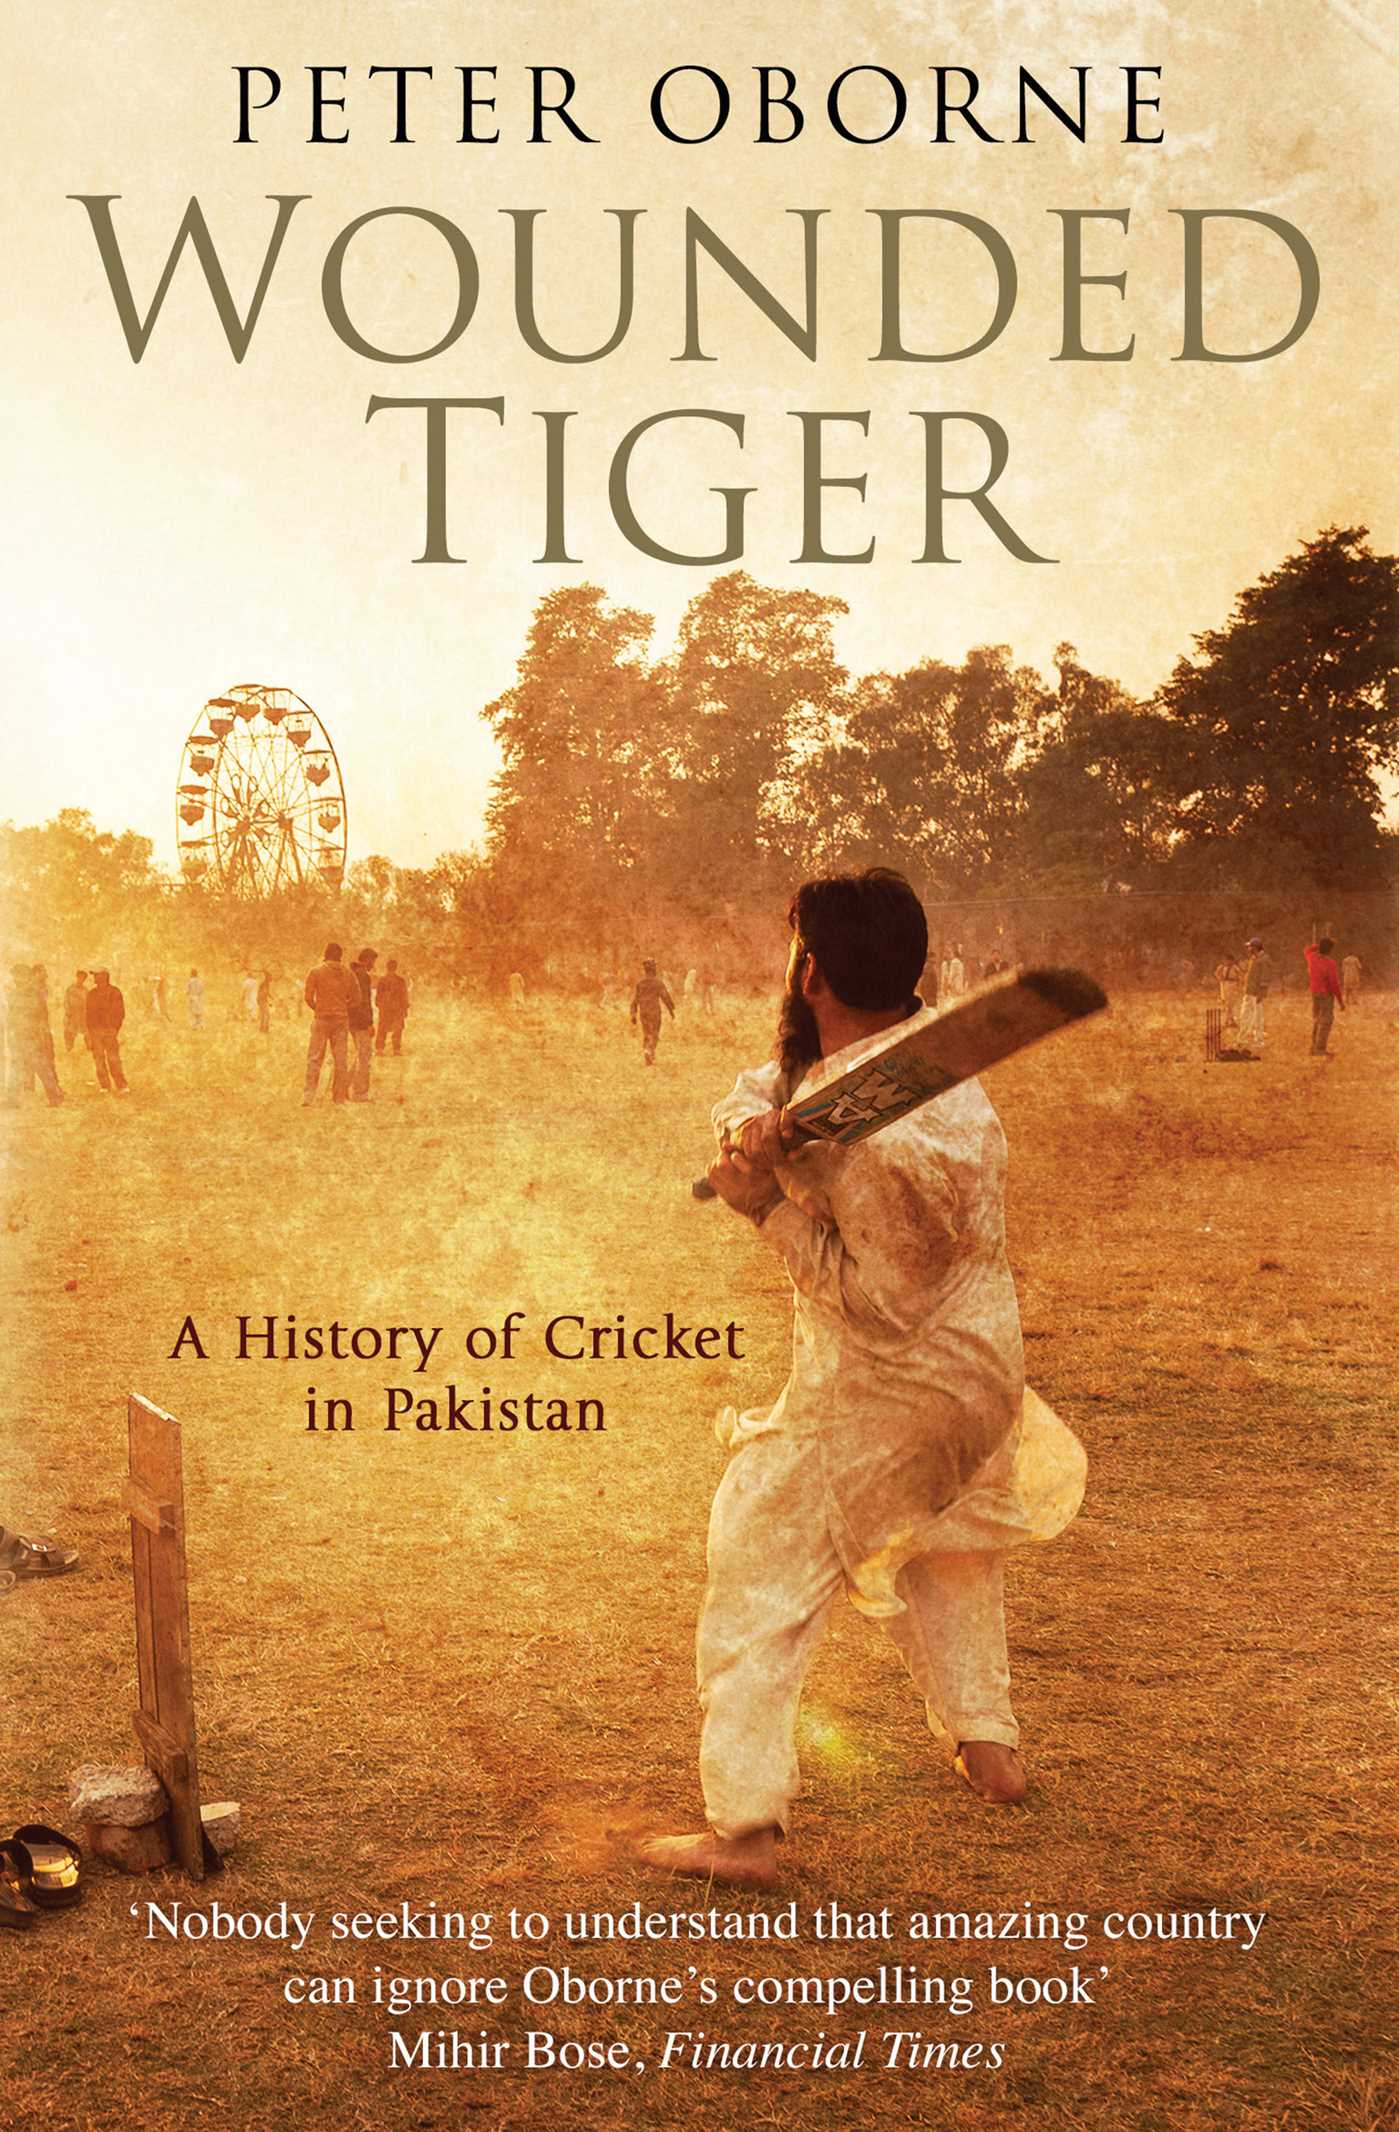 Wounded Tiger | Book by Peter Oborne | Official Publisher Page ...